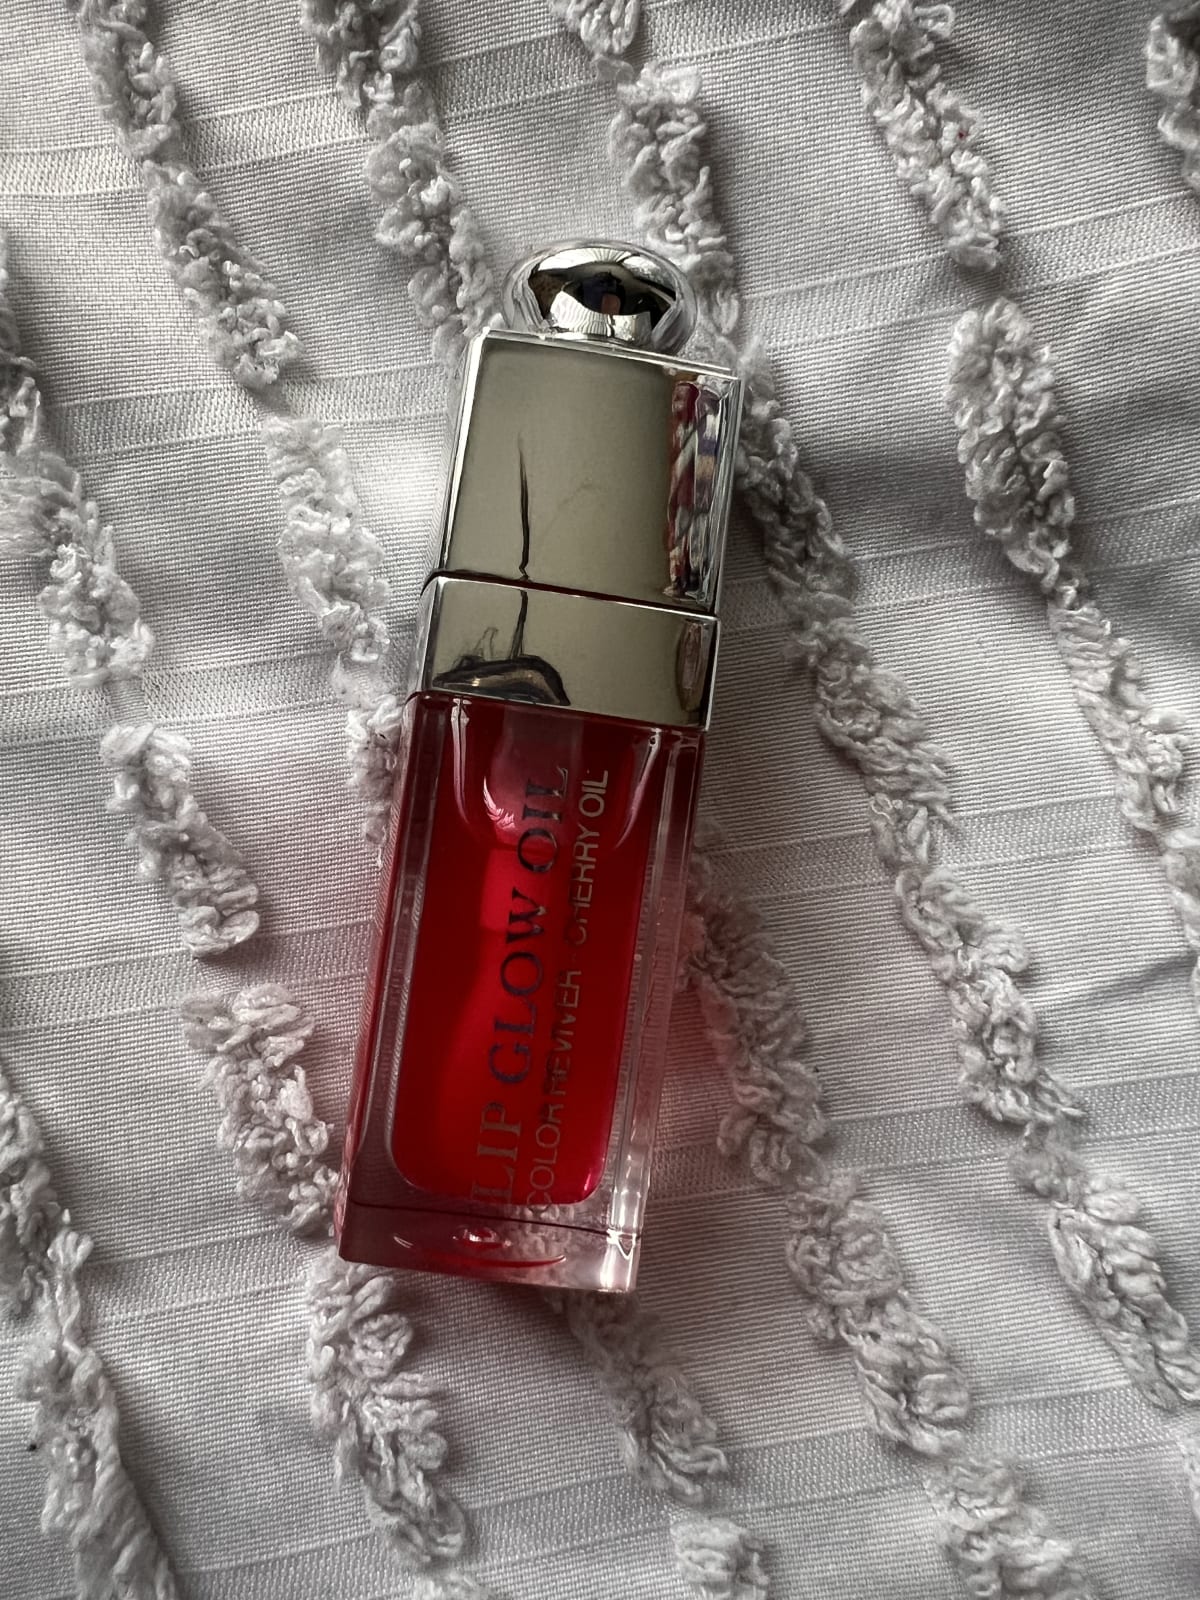 DIOR Addict Lip Glow Oil 000 Universal Clear 00 - review image